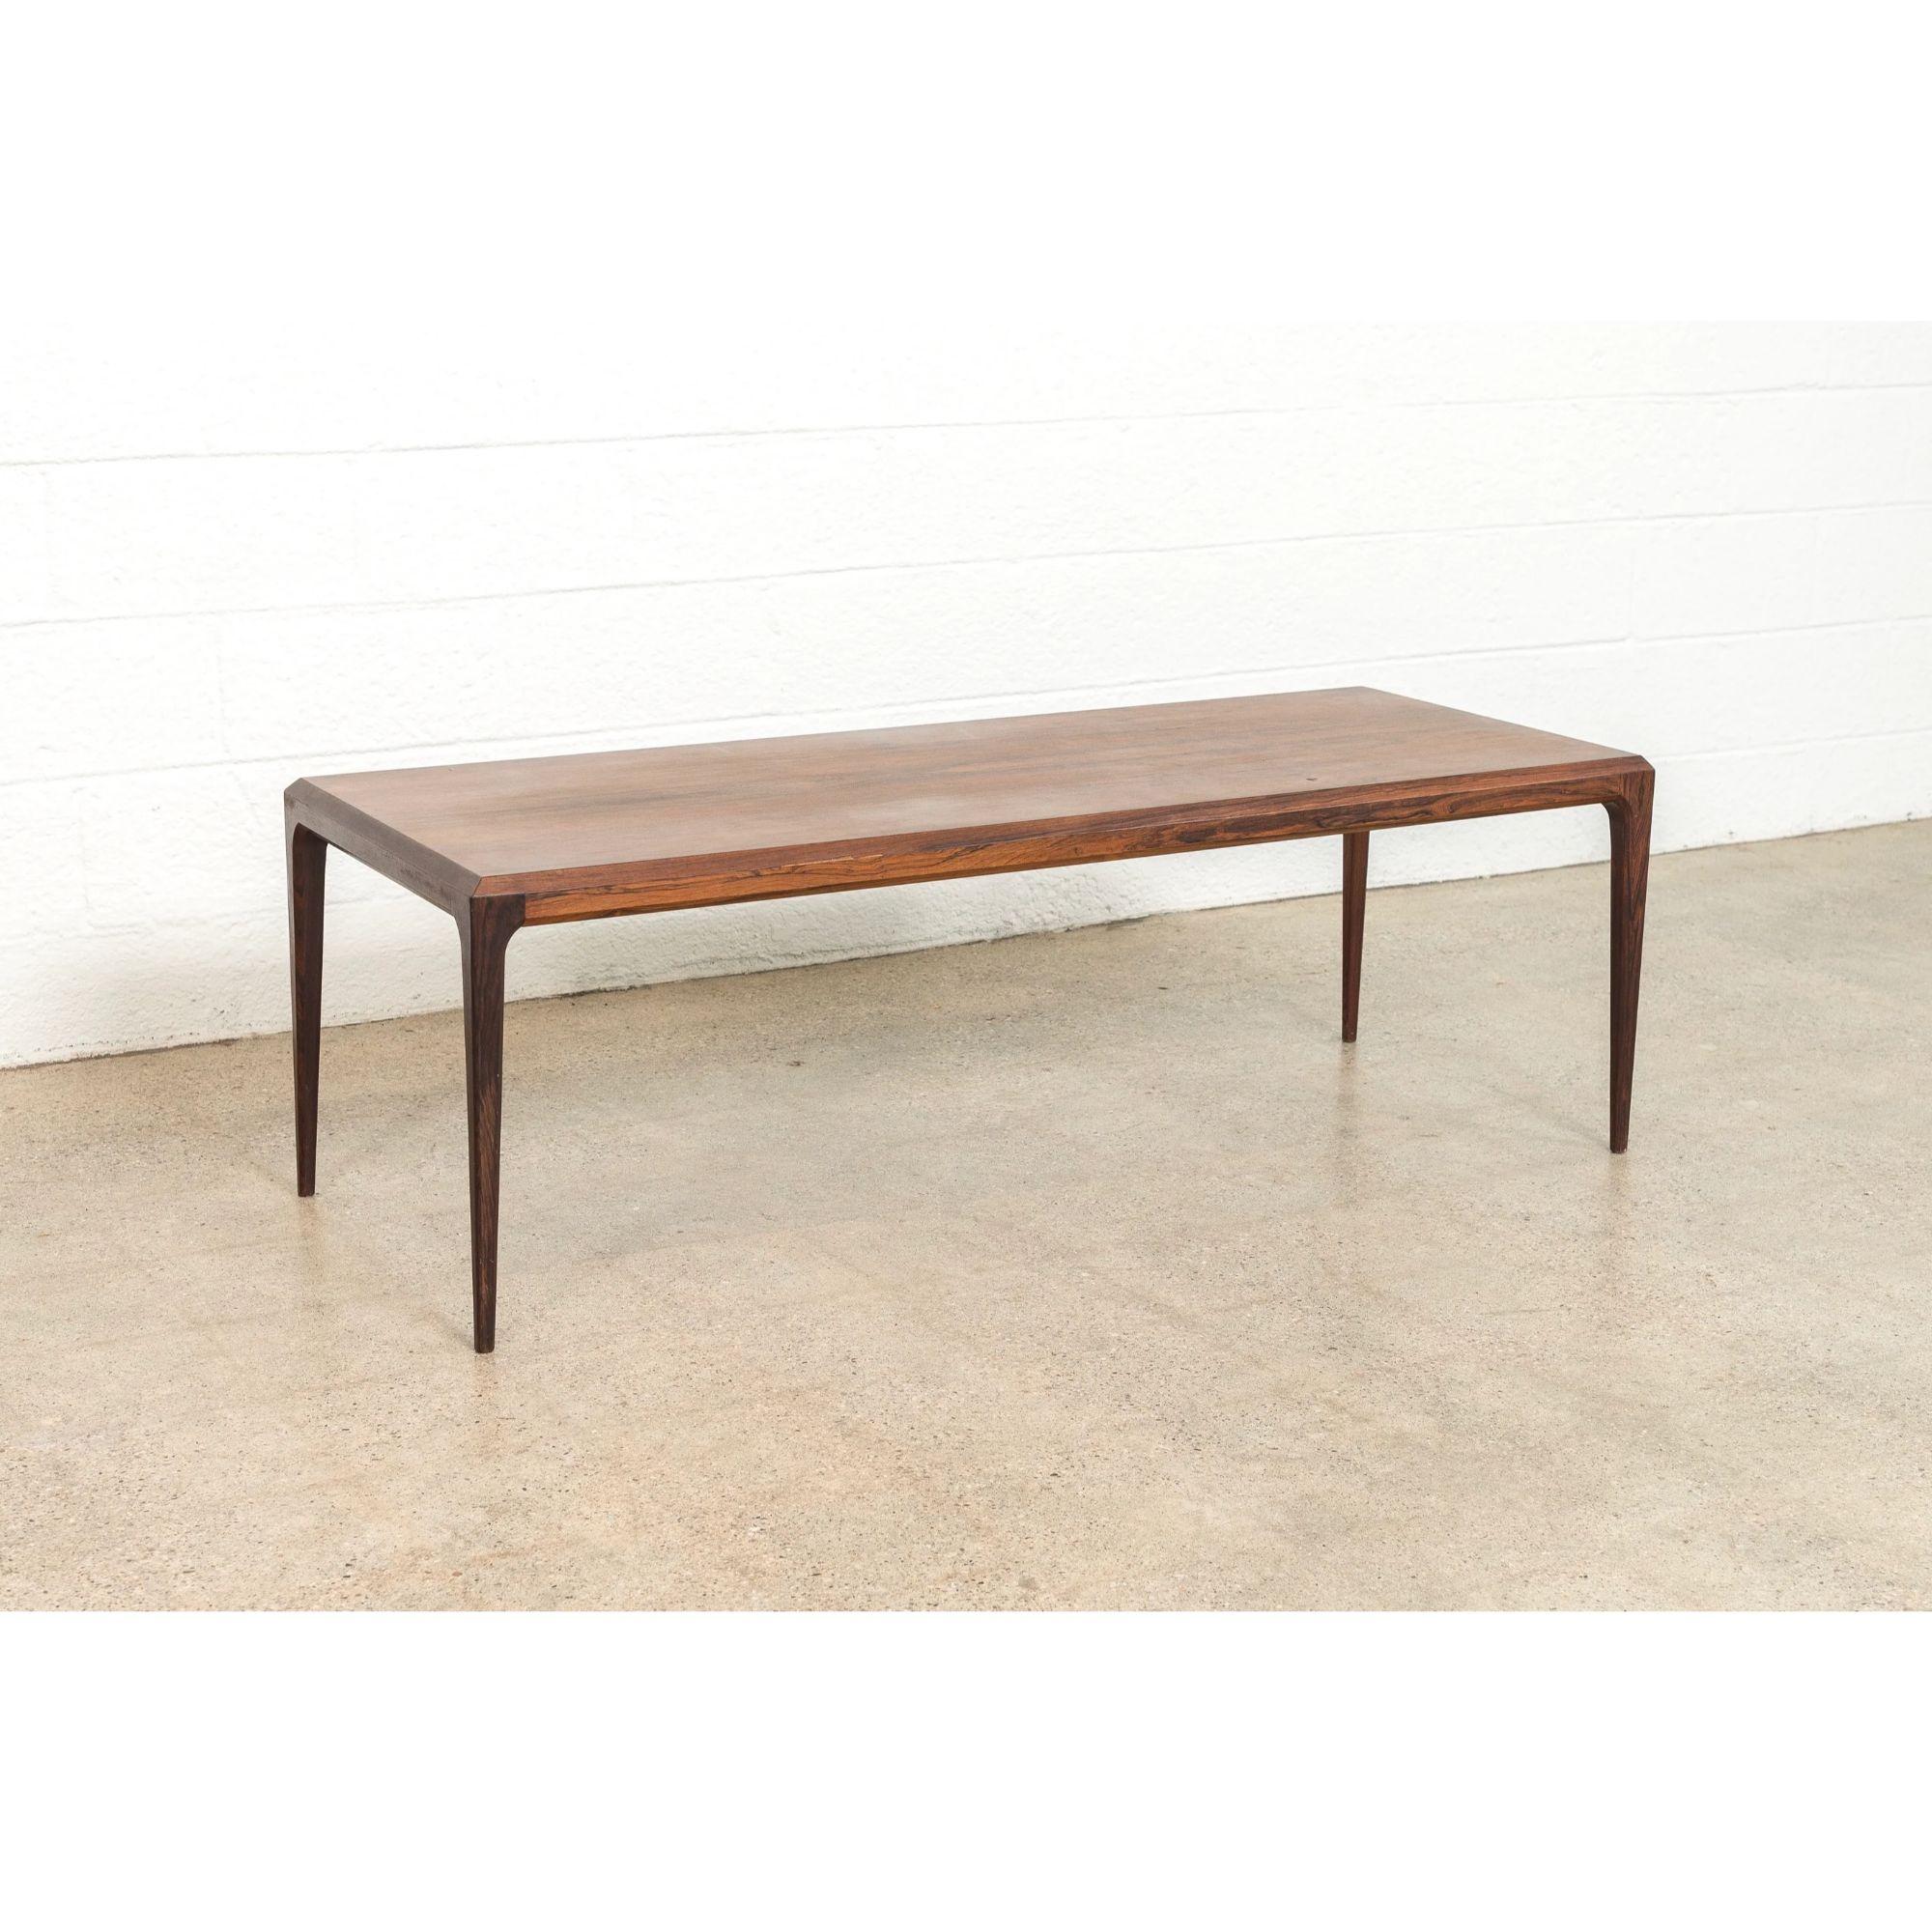 Mid-Century Modern Danish Modern Coffee Table in Rosewood by Johannes Andersen, 1960s For Sale